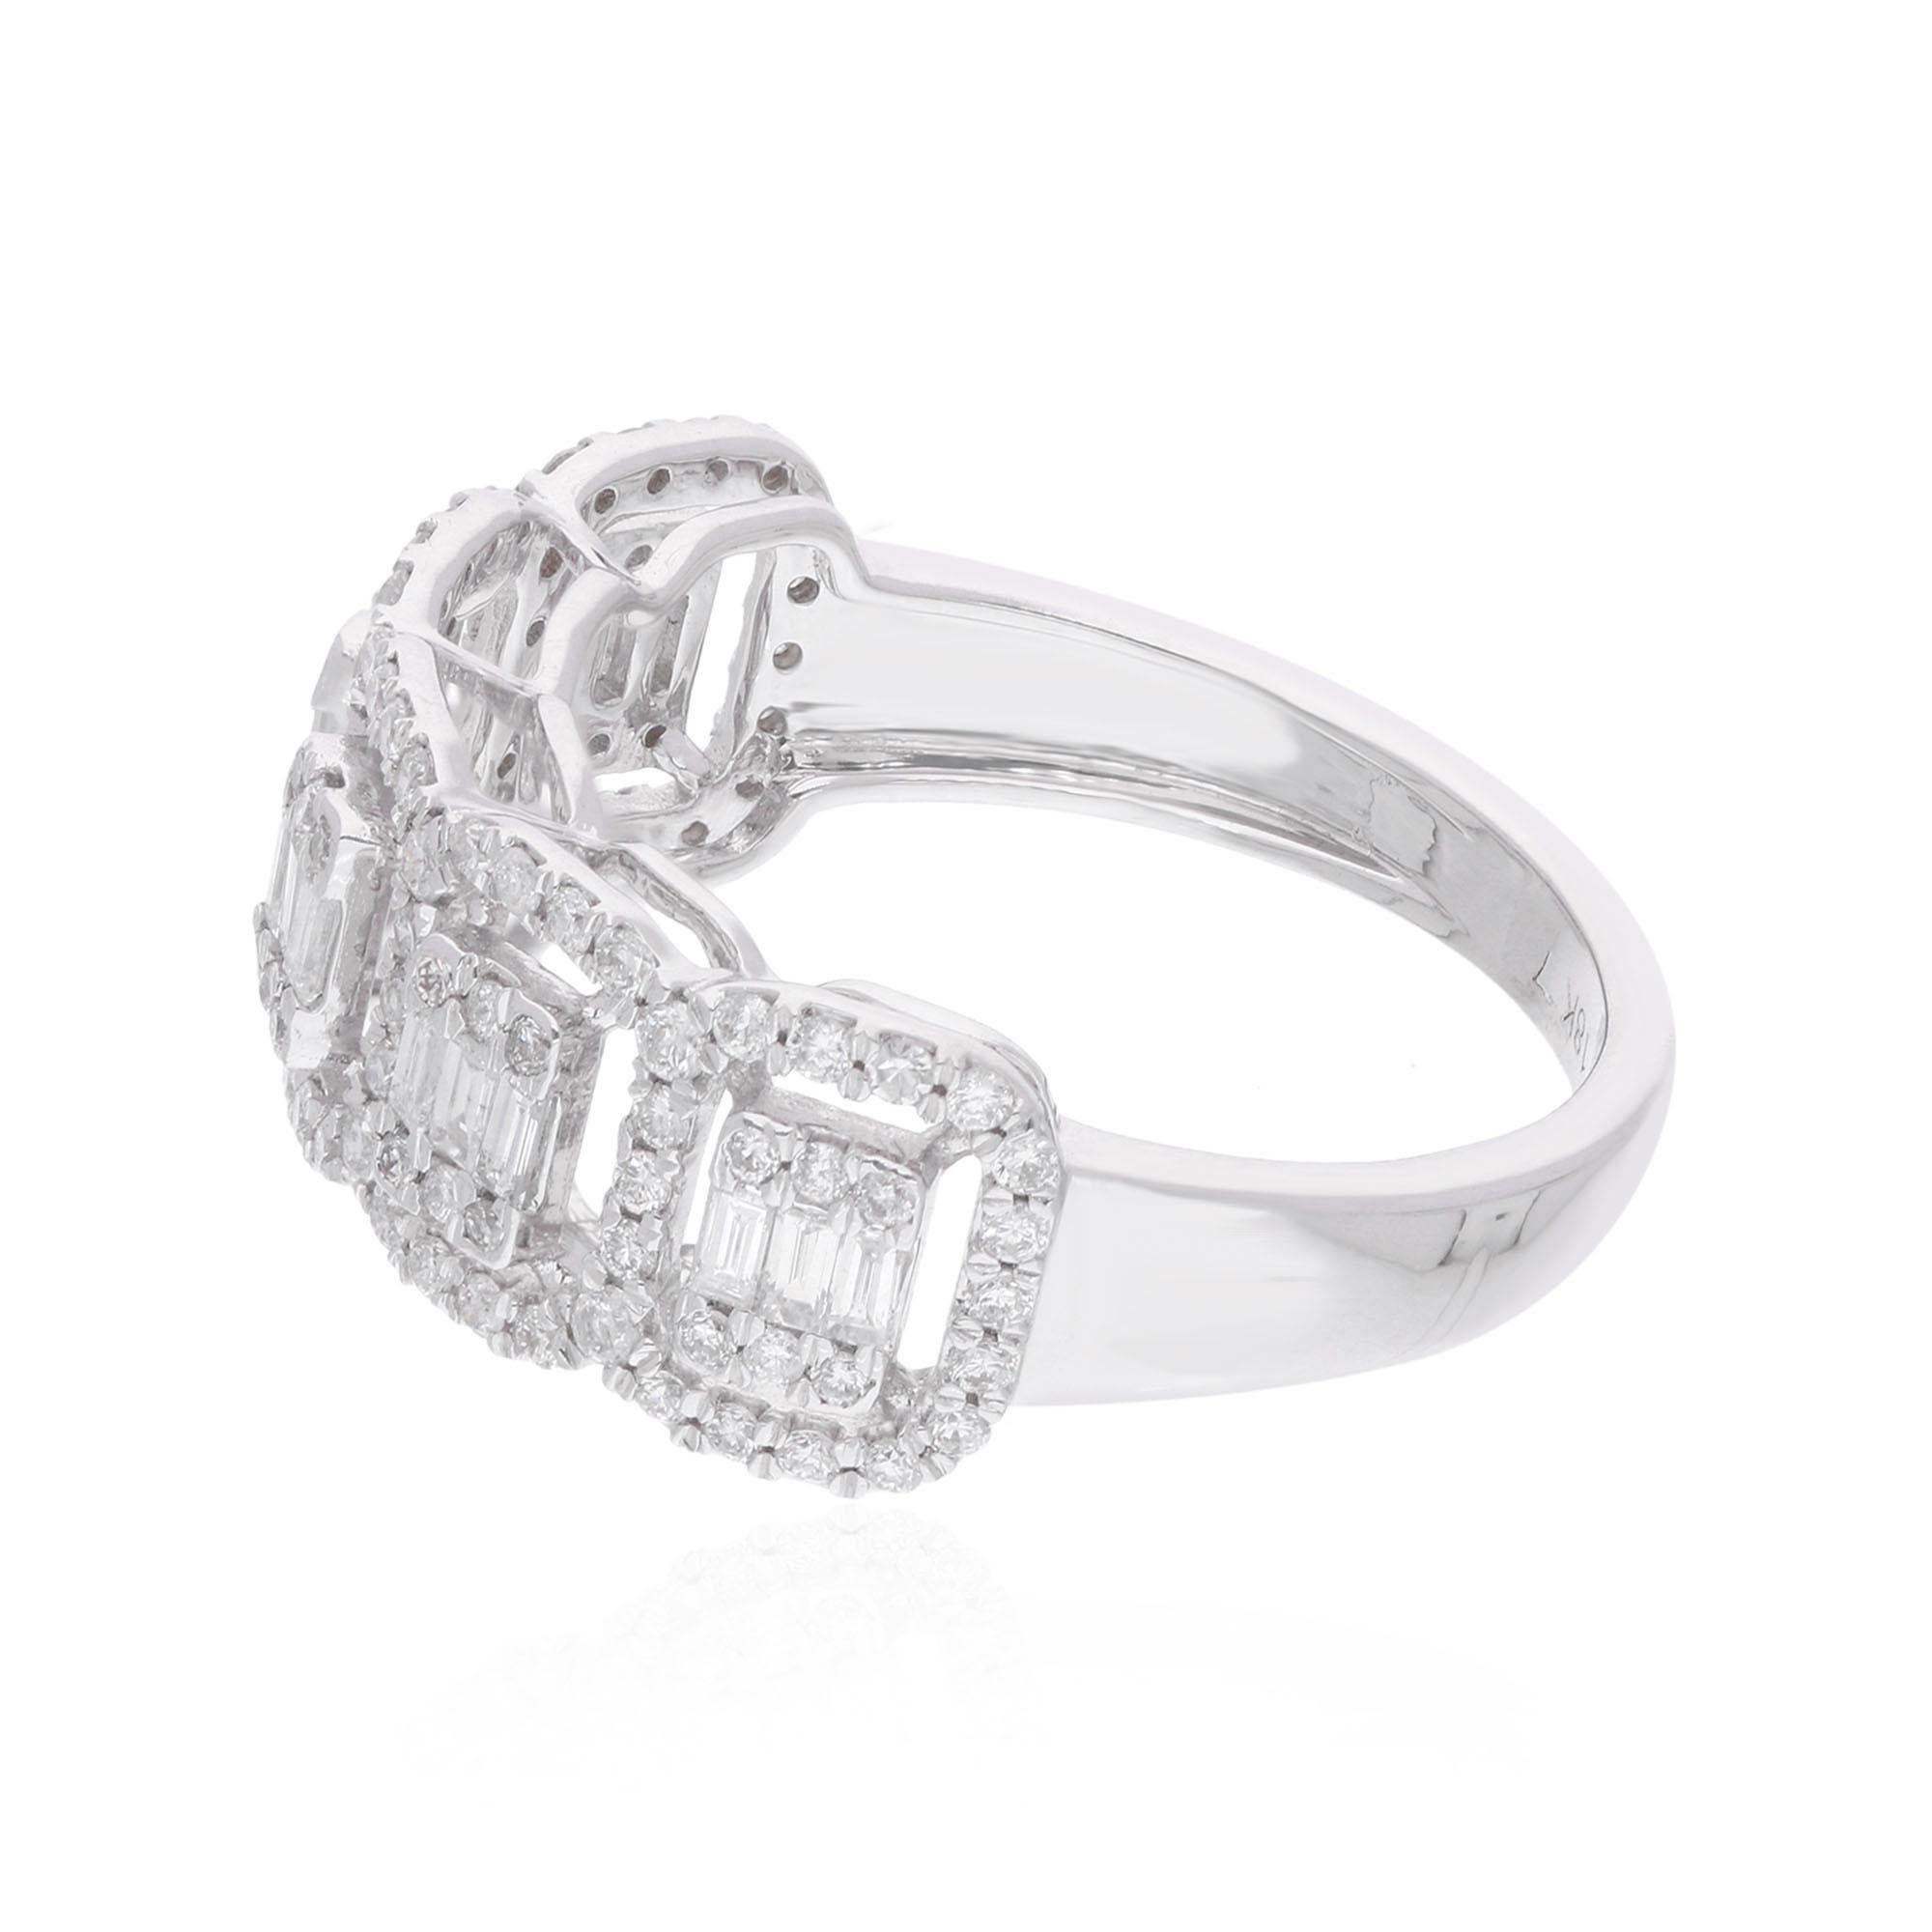 Embrace the allure of understated elegance with this Natural 0.74 Carat Baguette Diamond Dome Ring, meticulously crafted in 18 karat white gold to grace your hand with sophistication and grace. This exquisite ring features a stunning dome-shaped